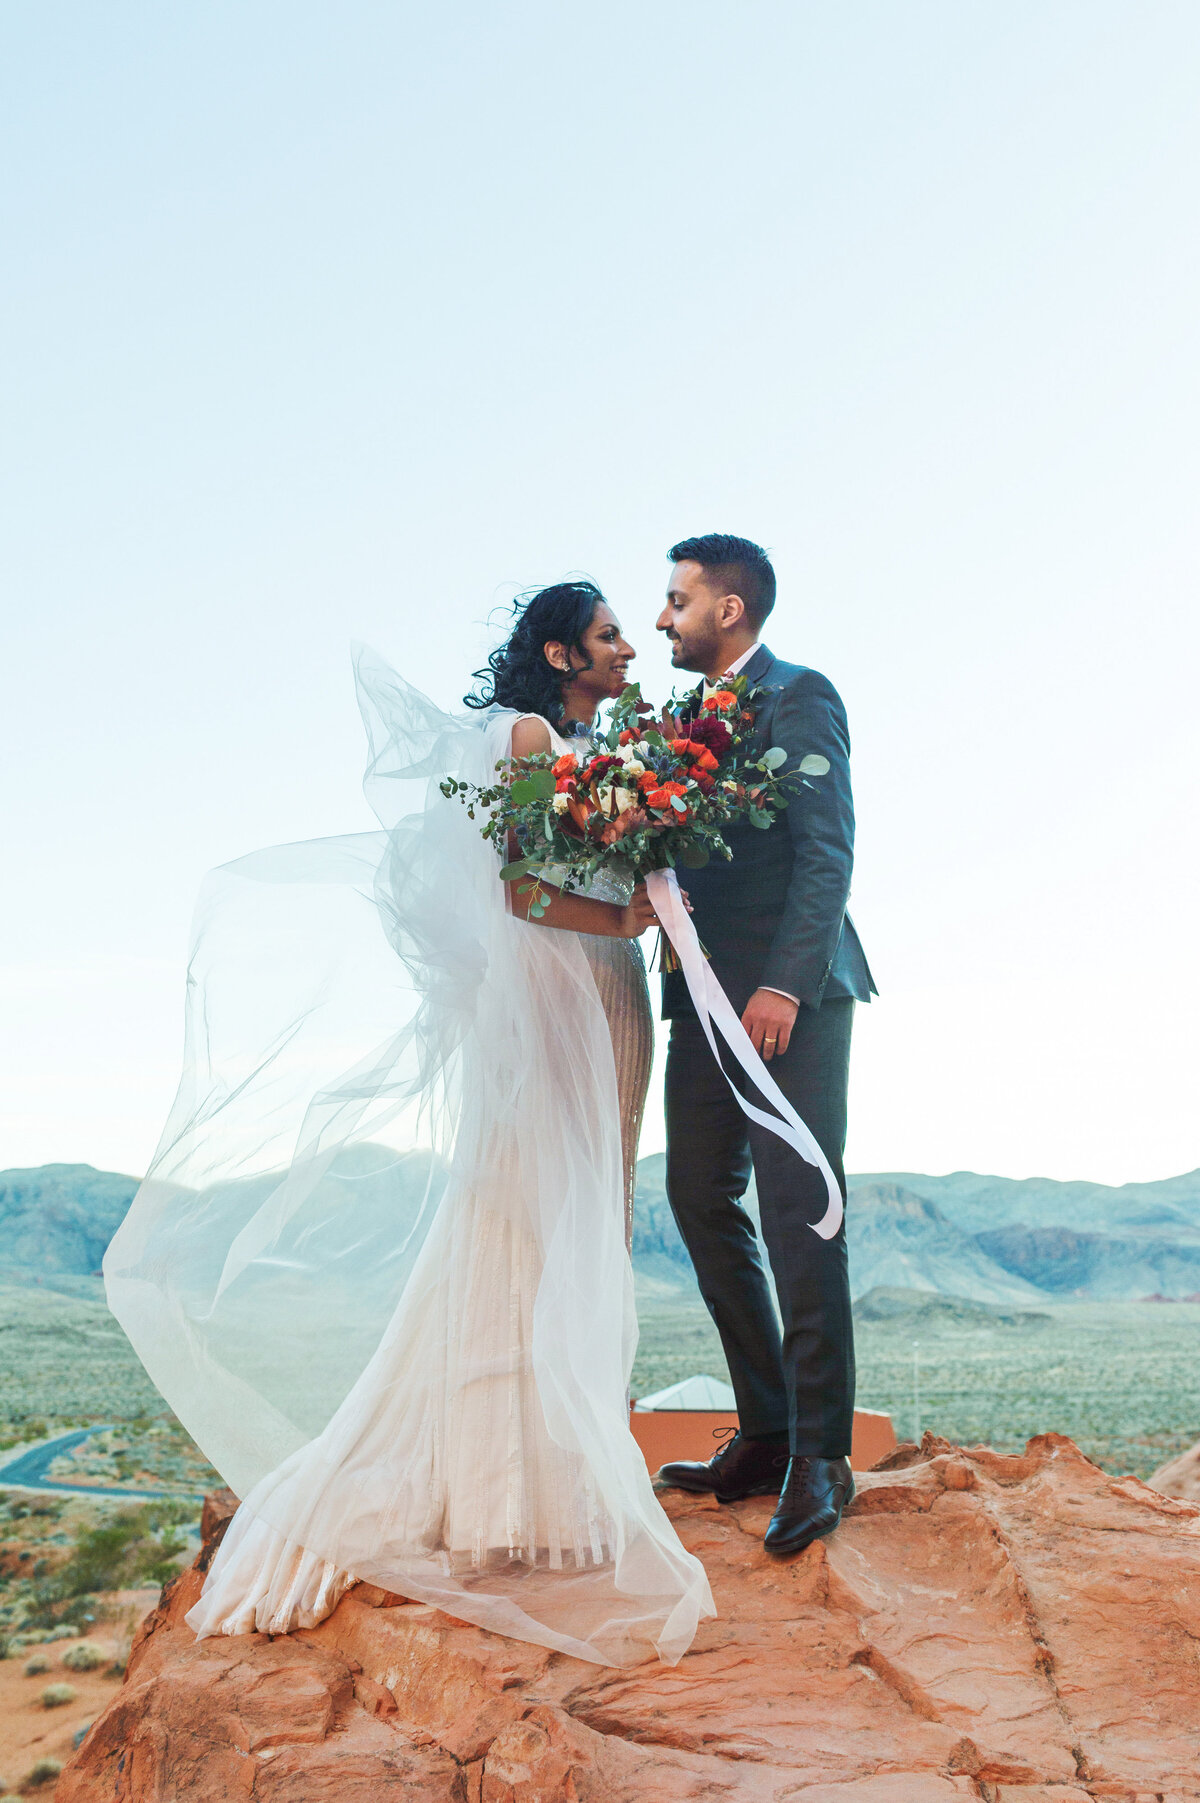 Cactus and Lace Las Vegas Desert Wedding Location Valley of Fire6